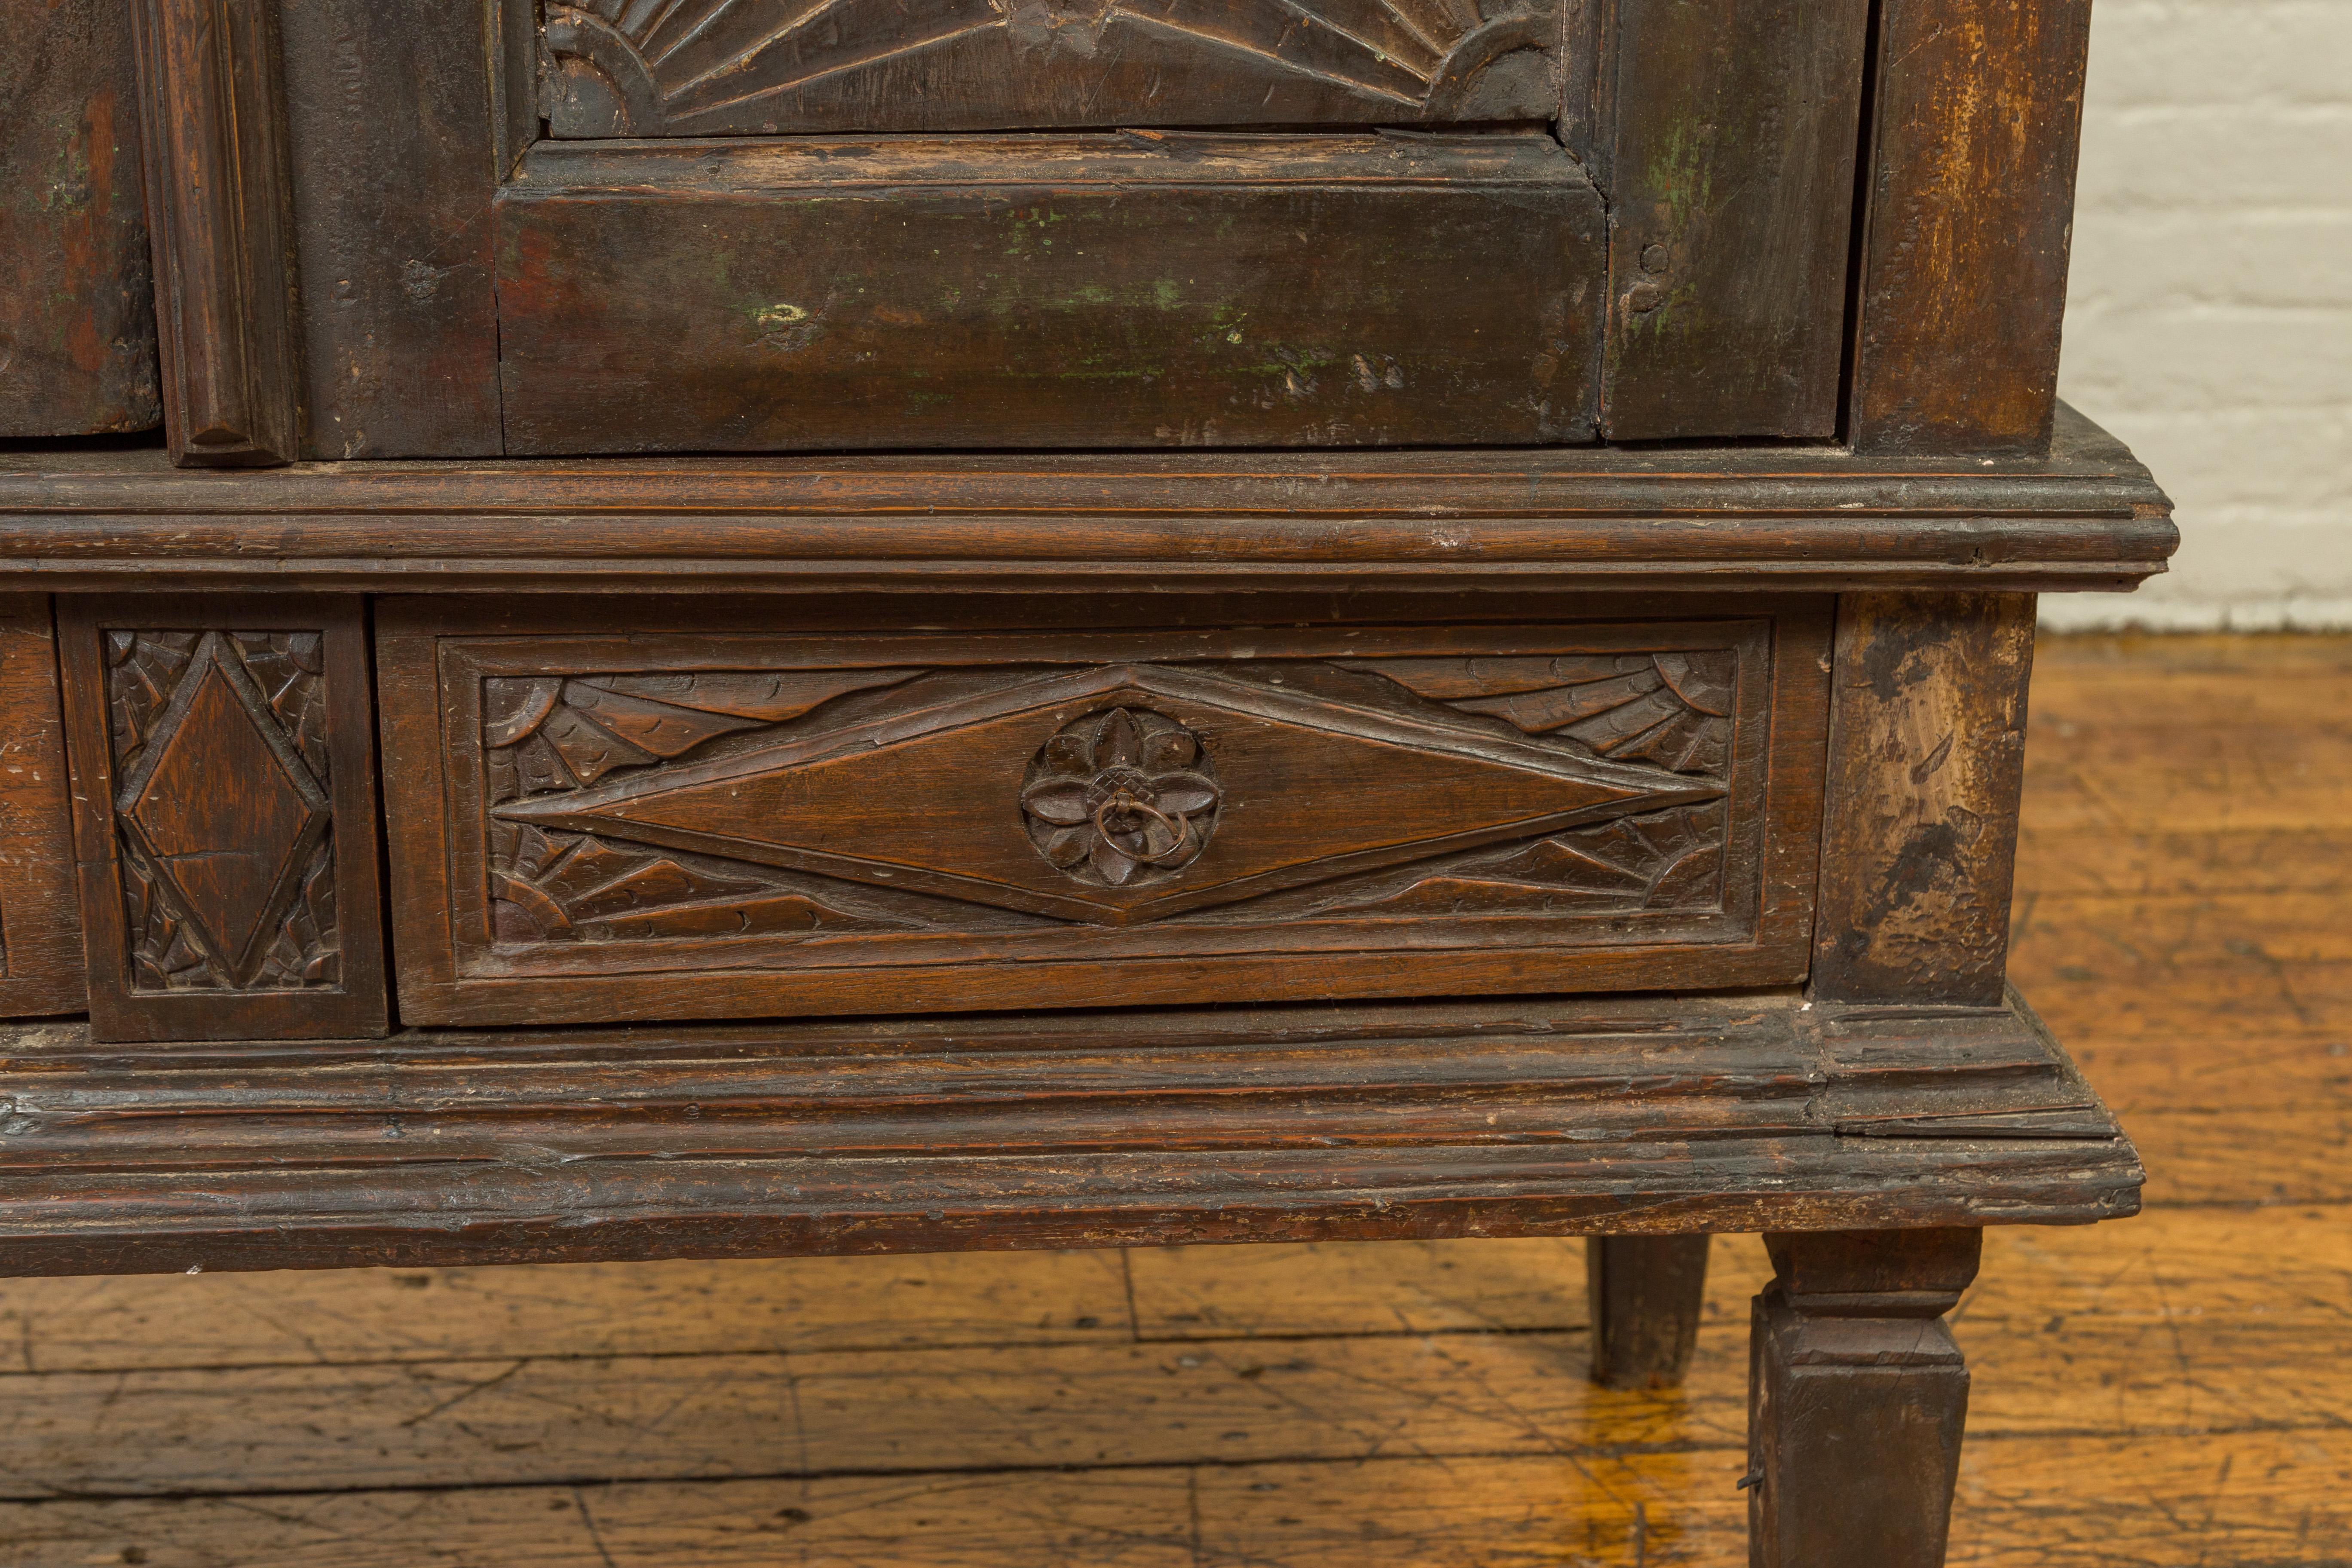 19th Century Indonesian Wooden Cabinet with Doors, Drawers and Carved Medallions For Sale 3